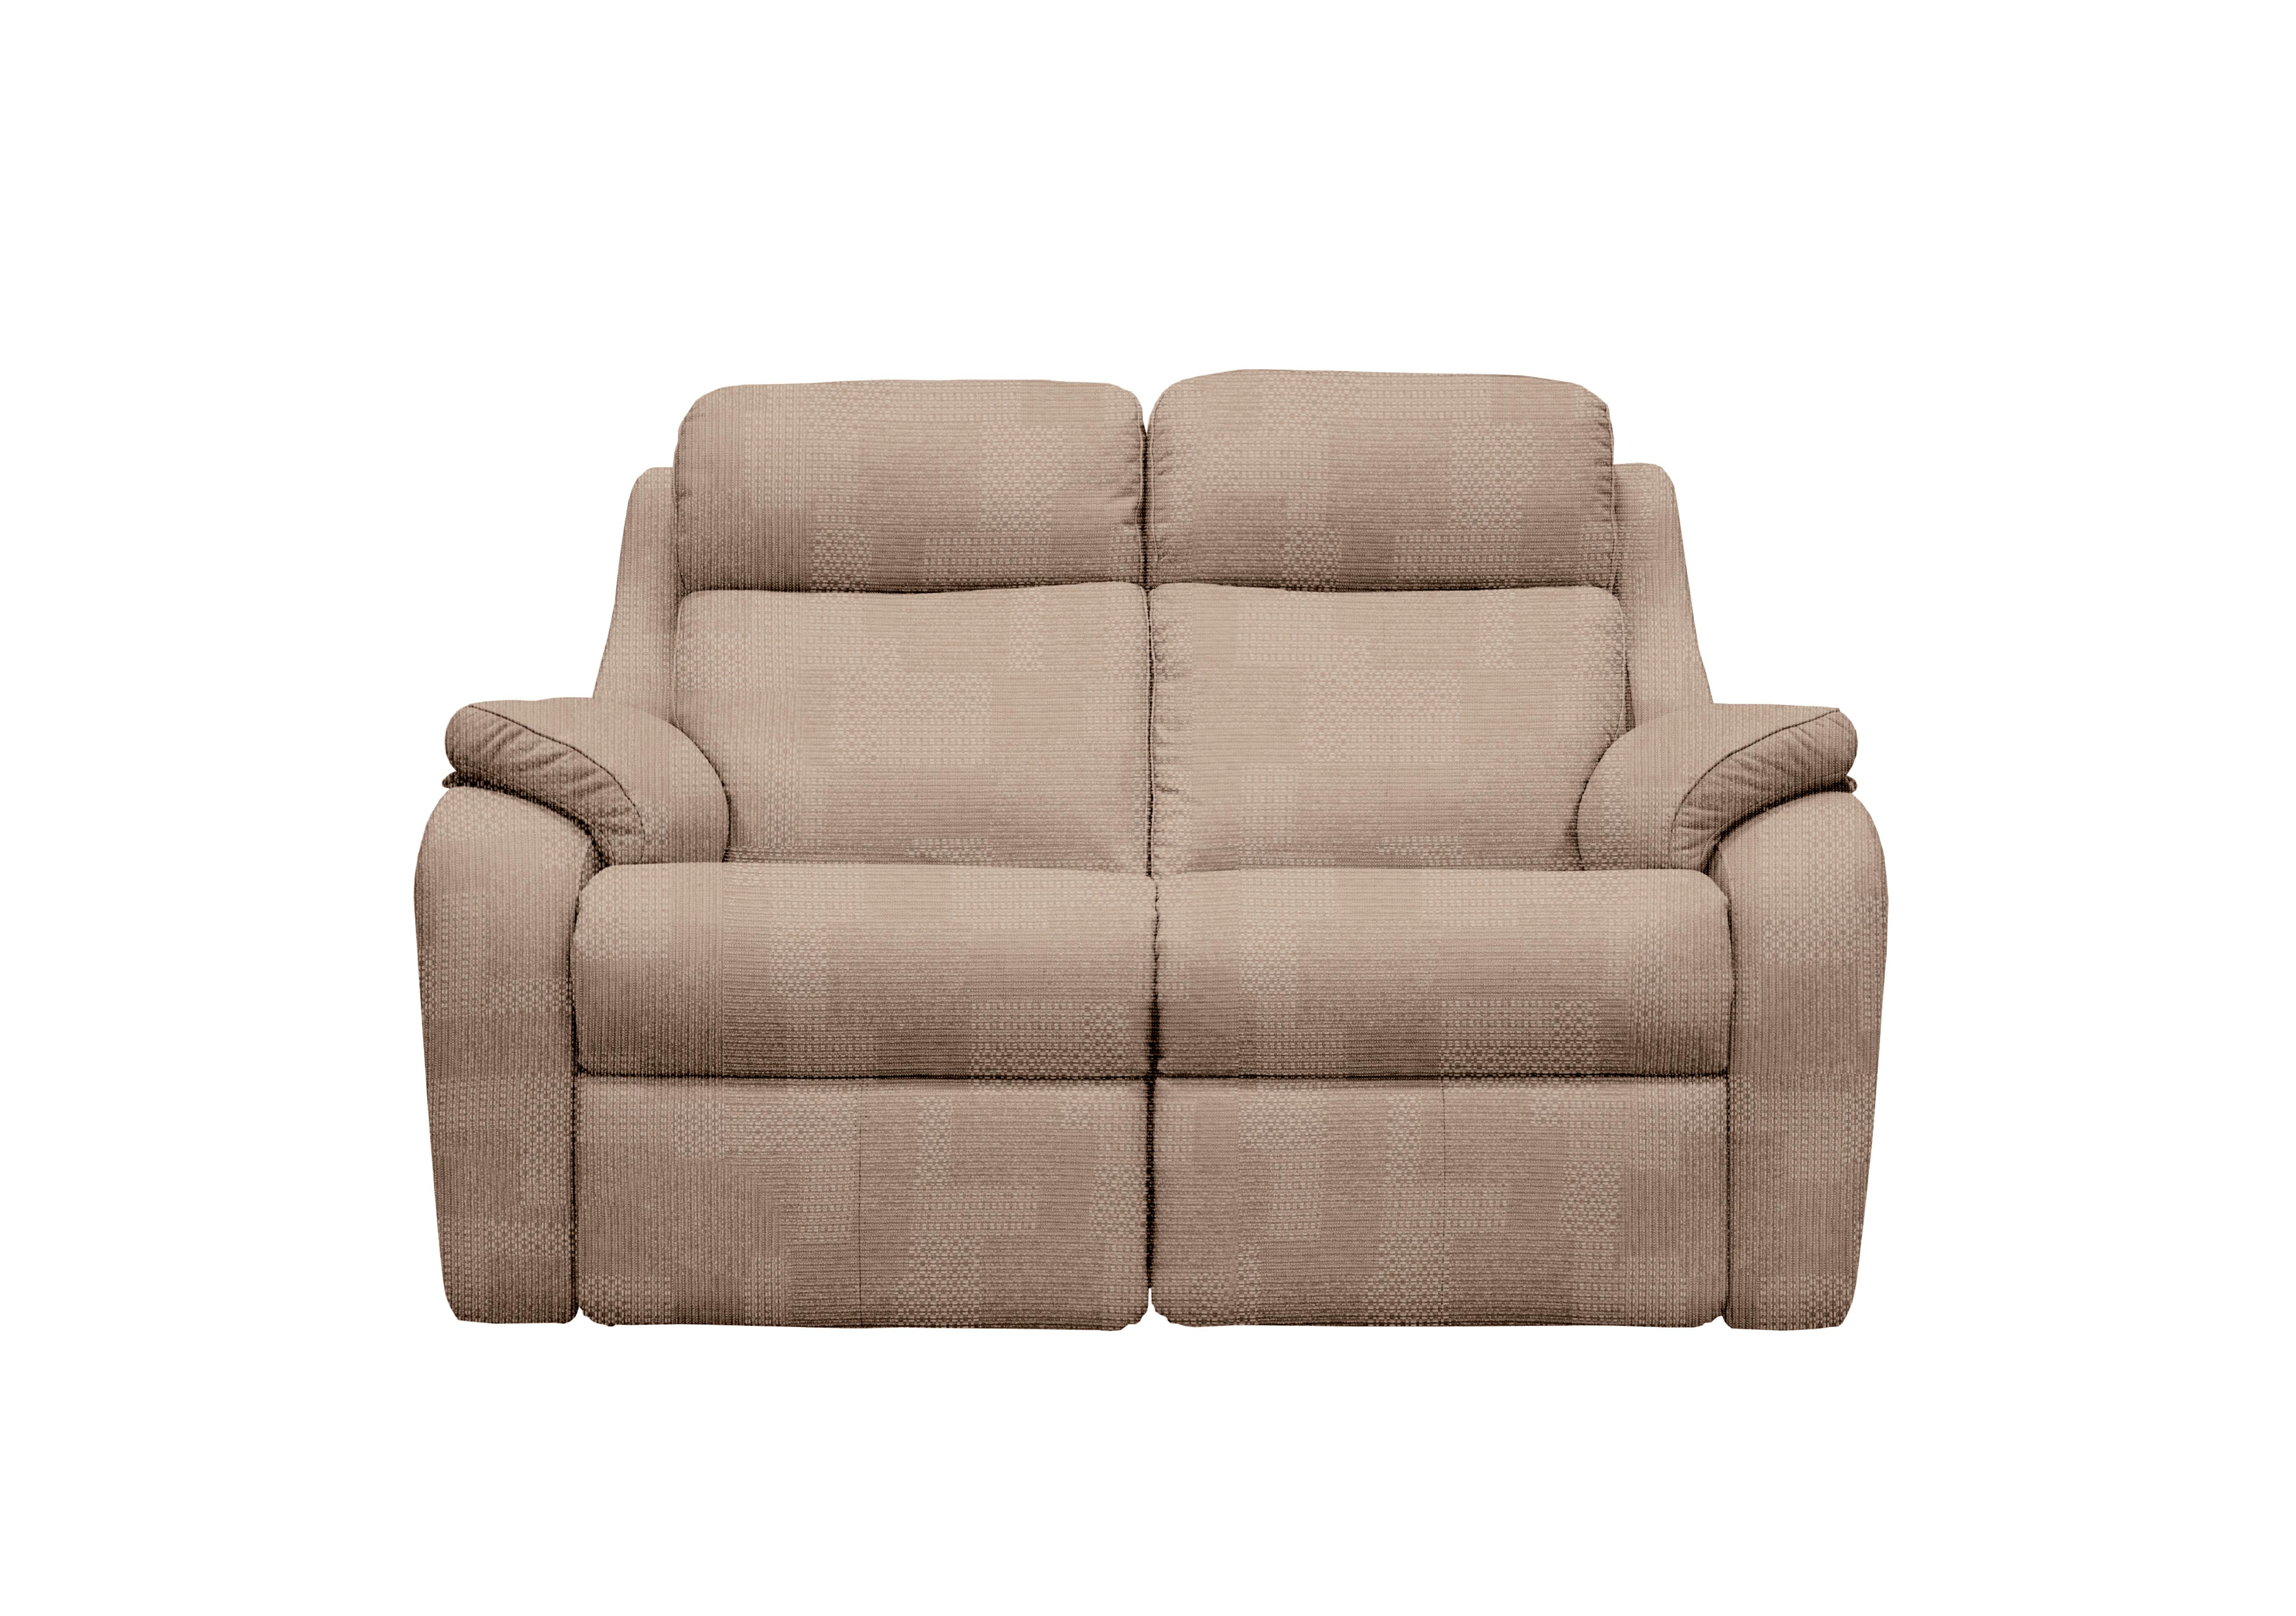 Kingsbury 2 Seater Fabric Power Recliner Sofa with Power Headrests in A800 Faro Sand on Furniture Village